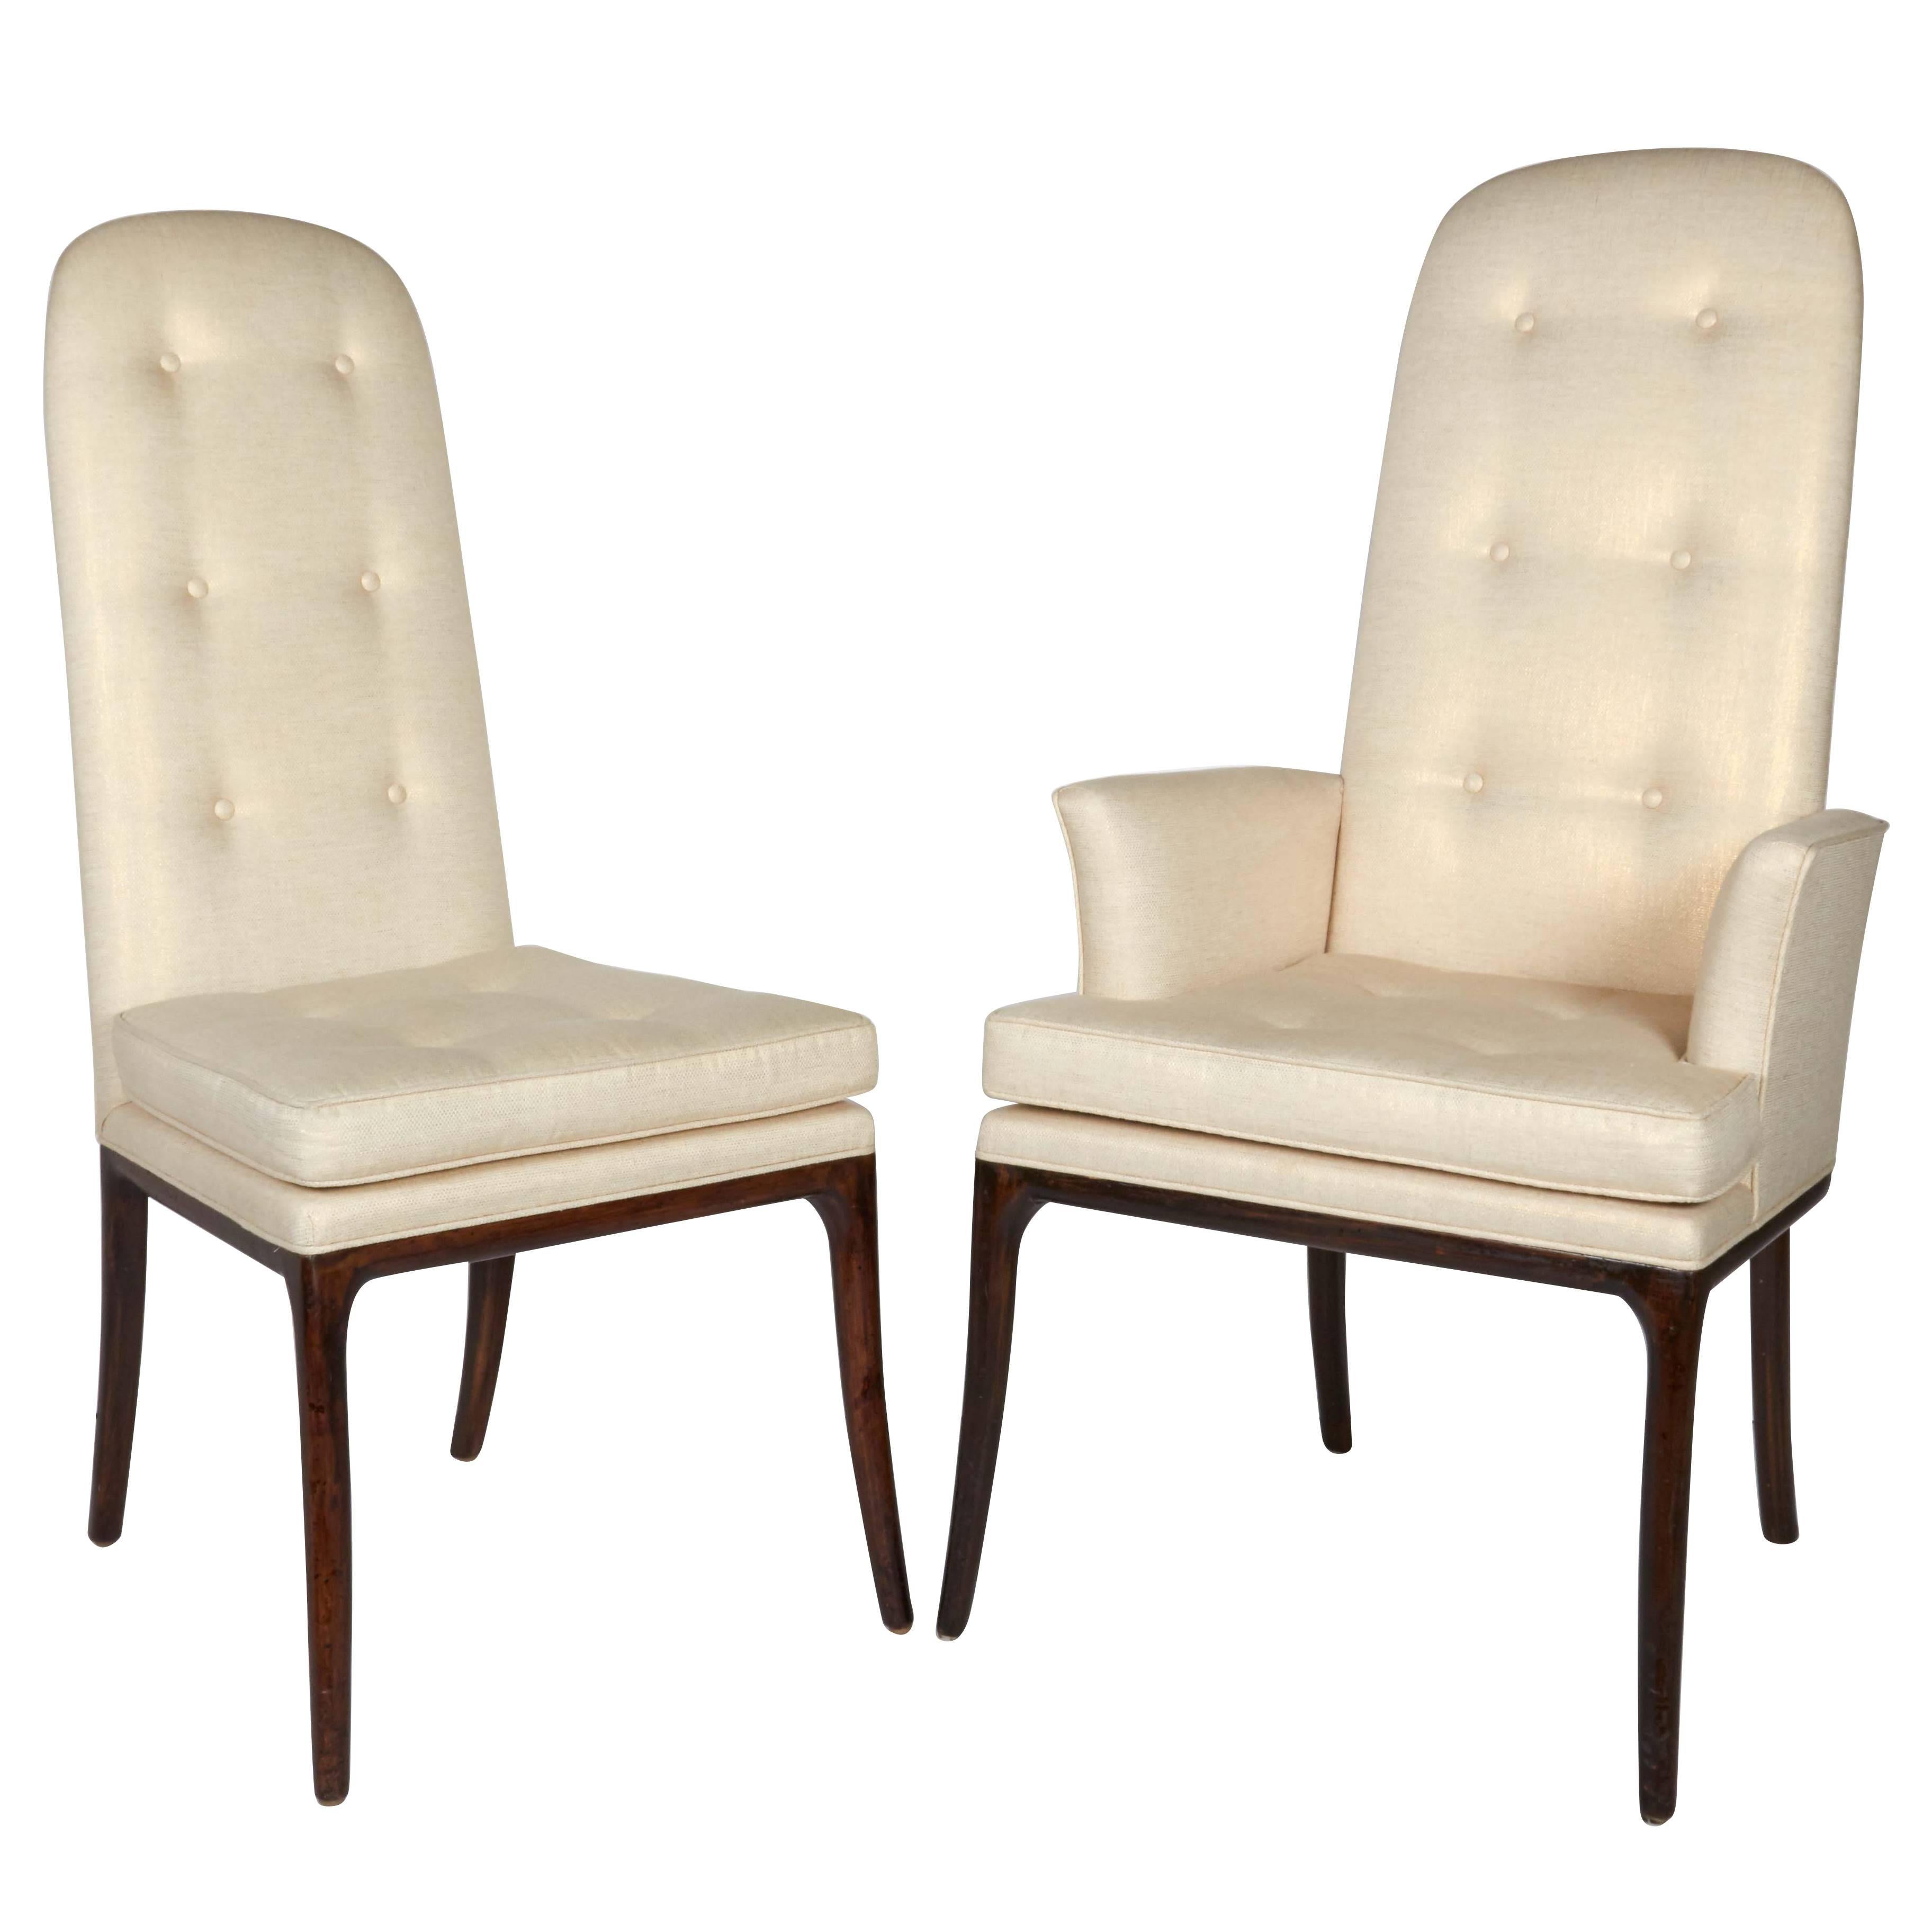 Set of Six Elegant High Back Dining Chairs Designed by Erwin-Lambeth